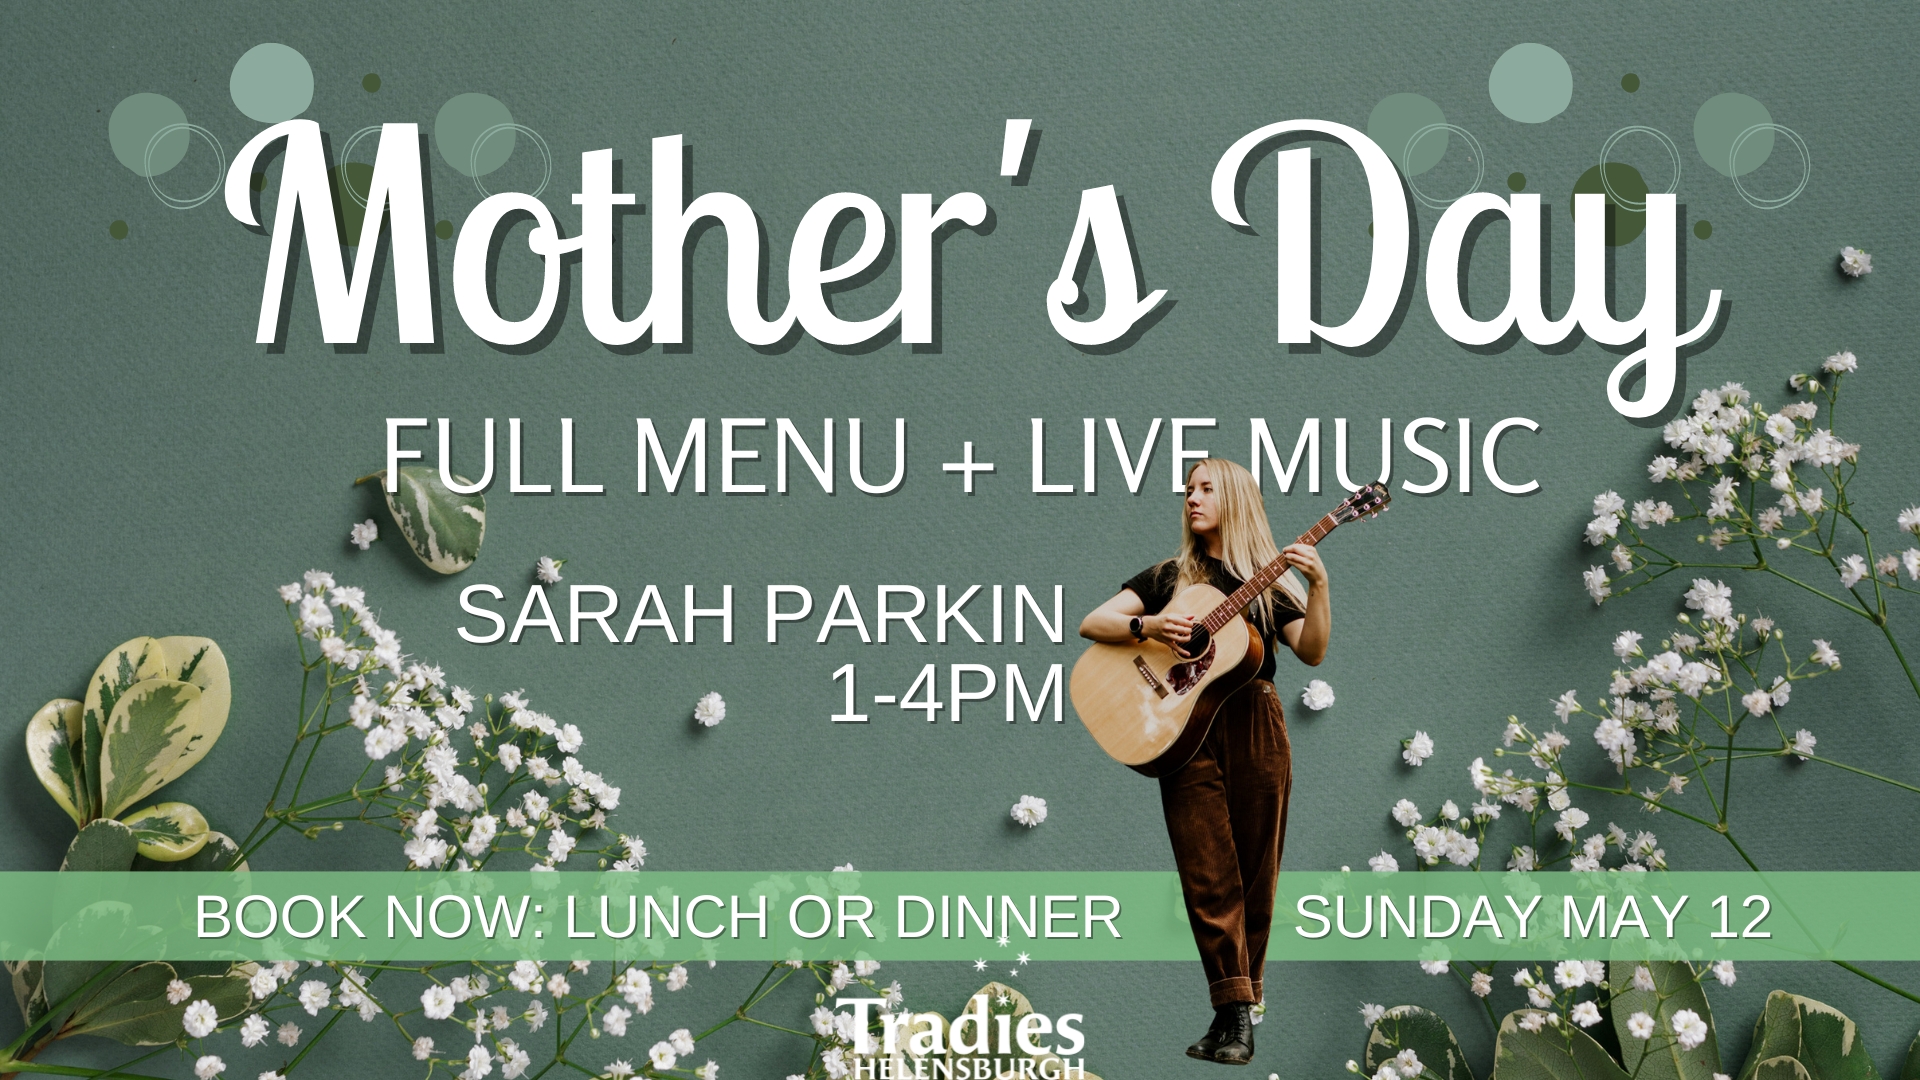 Mother's Day lunch and dinner at Tradies Helensburgh